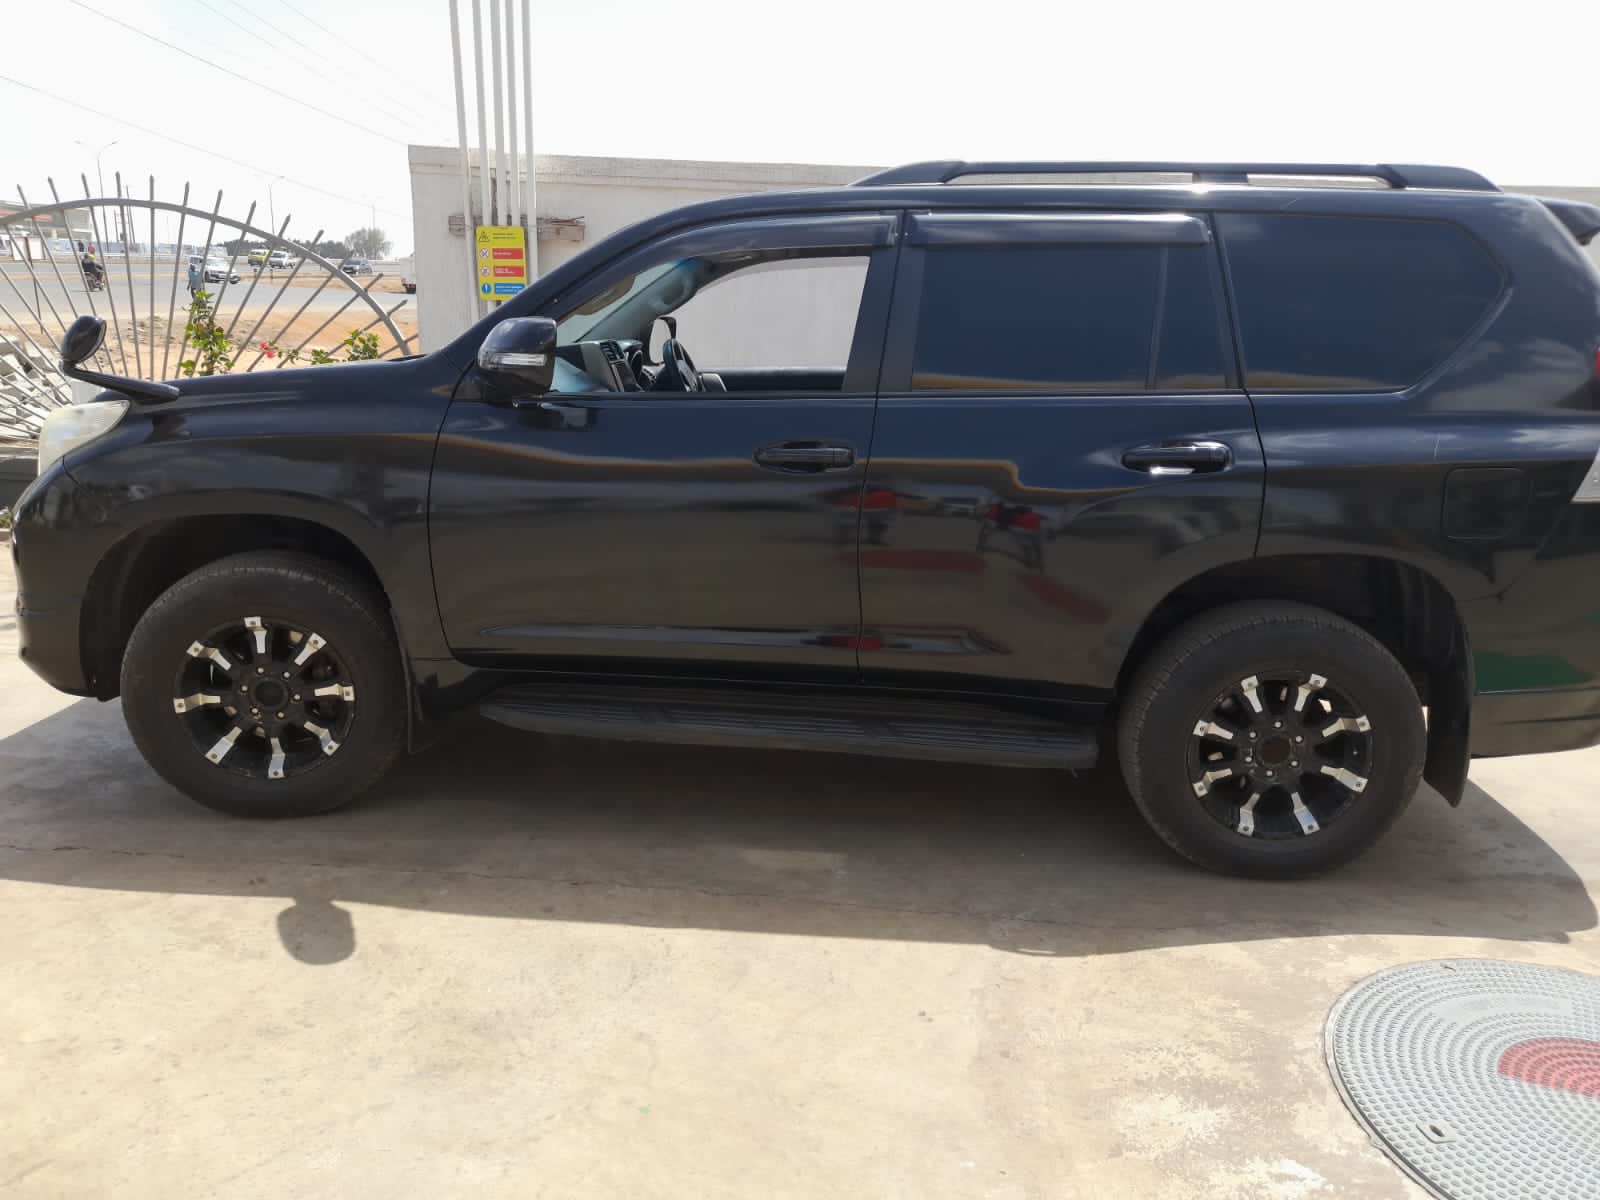 Toyota Prado 2013 SUNROOF QUICK SALE You Pay 30% Deposit Trade in OK EXCLUSIVE